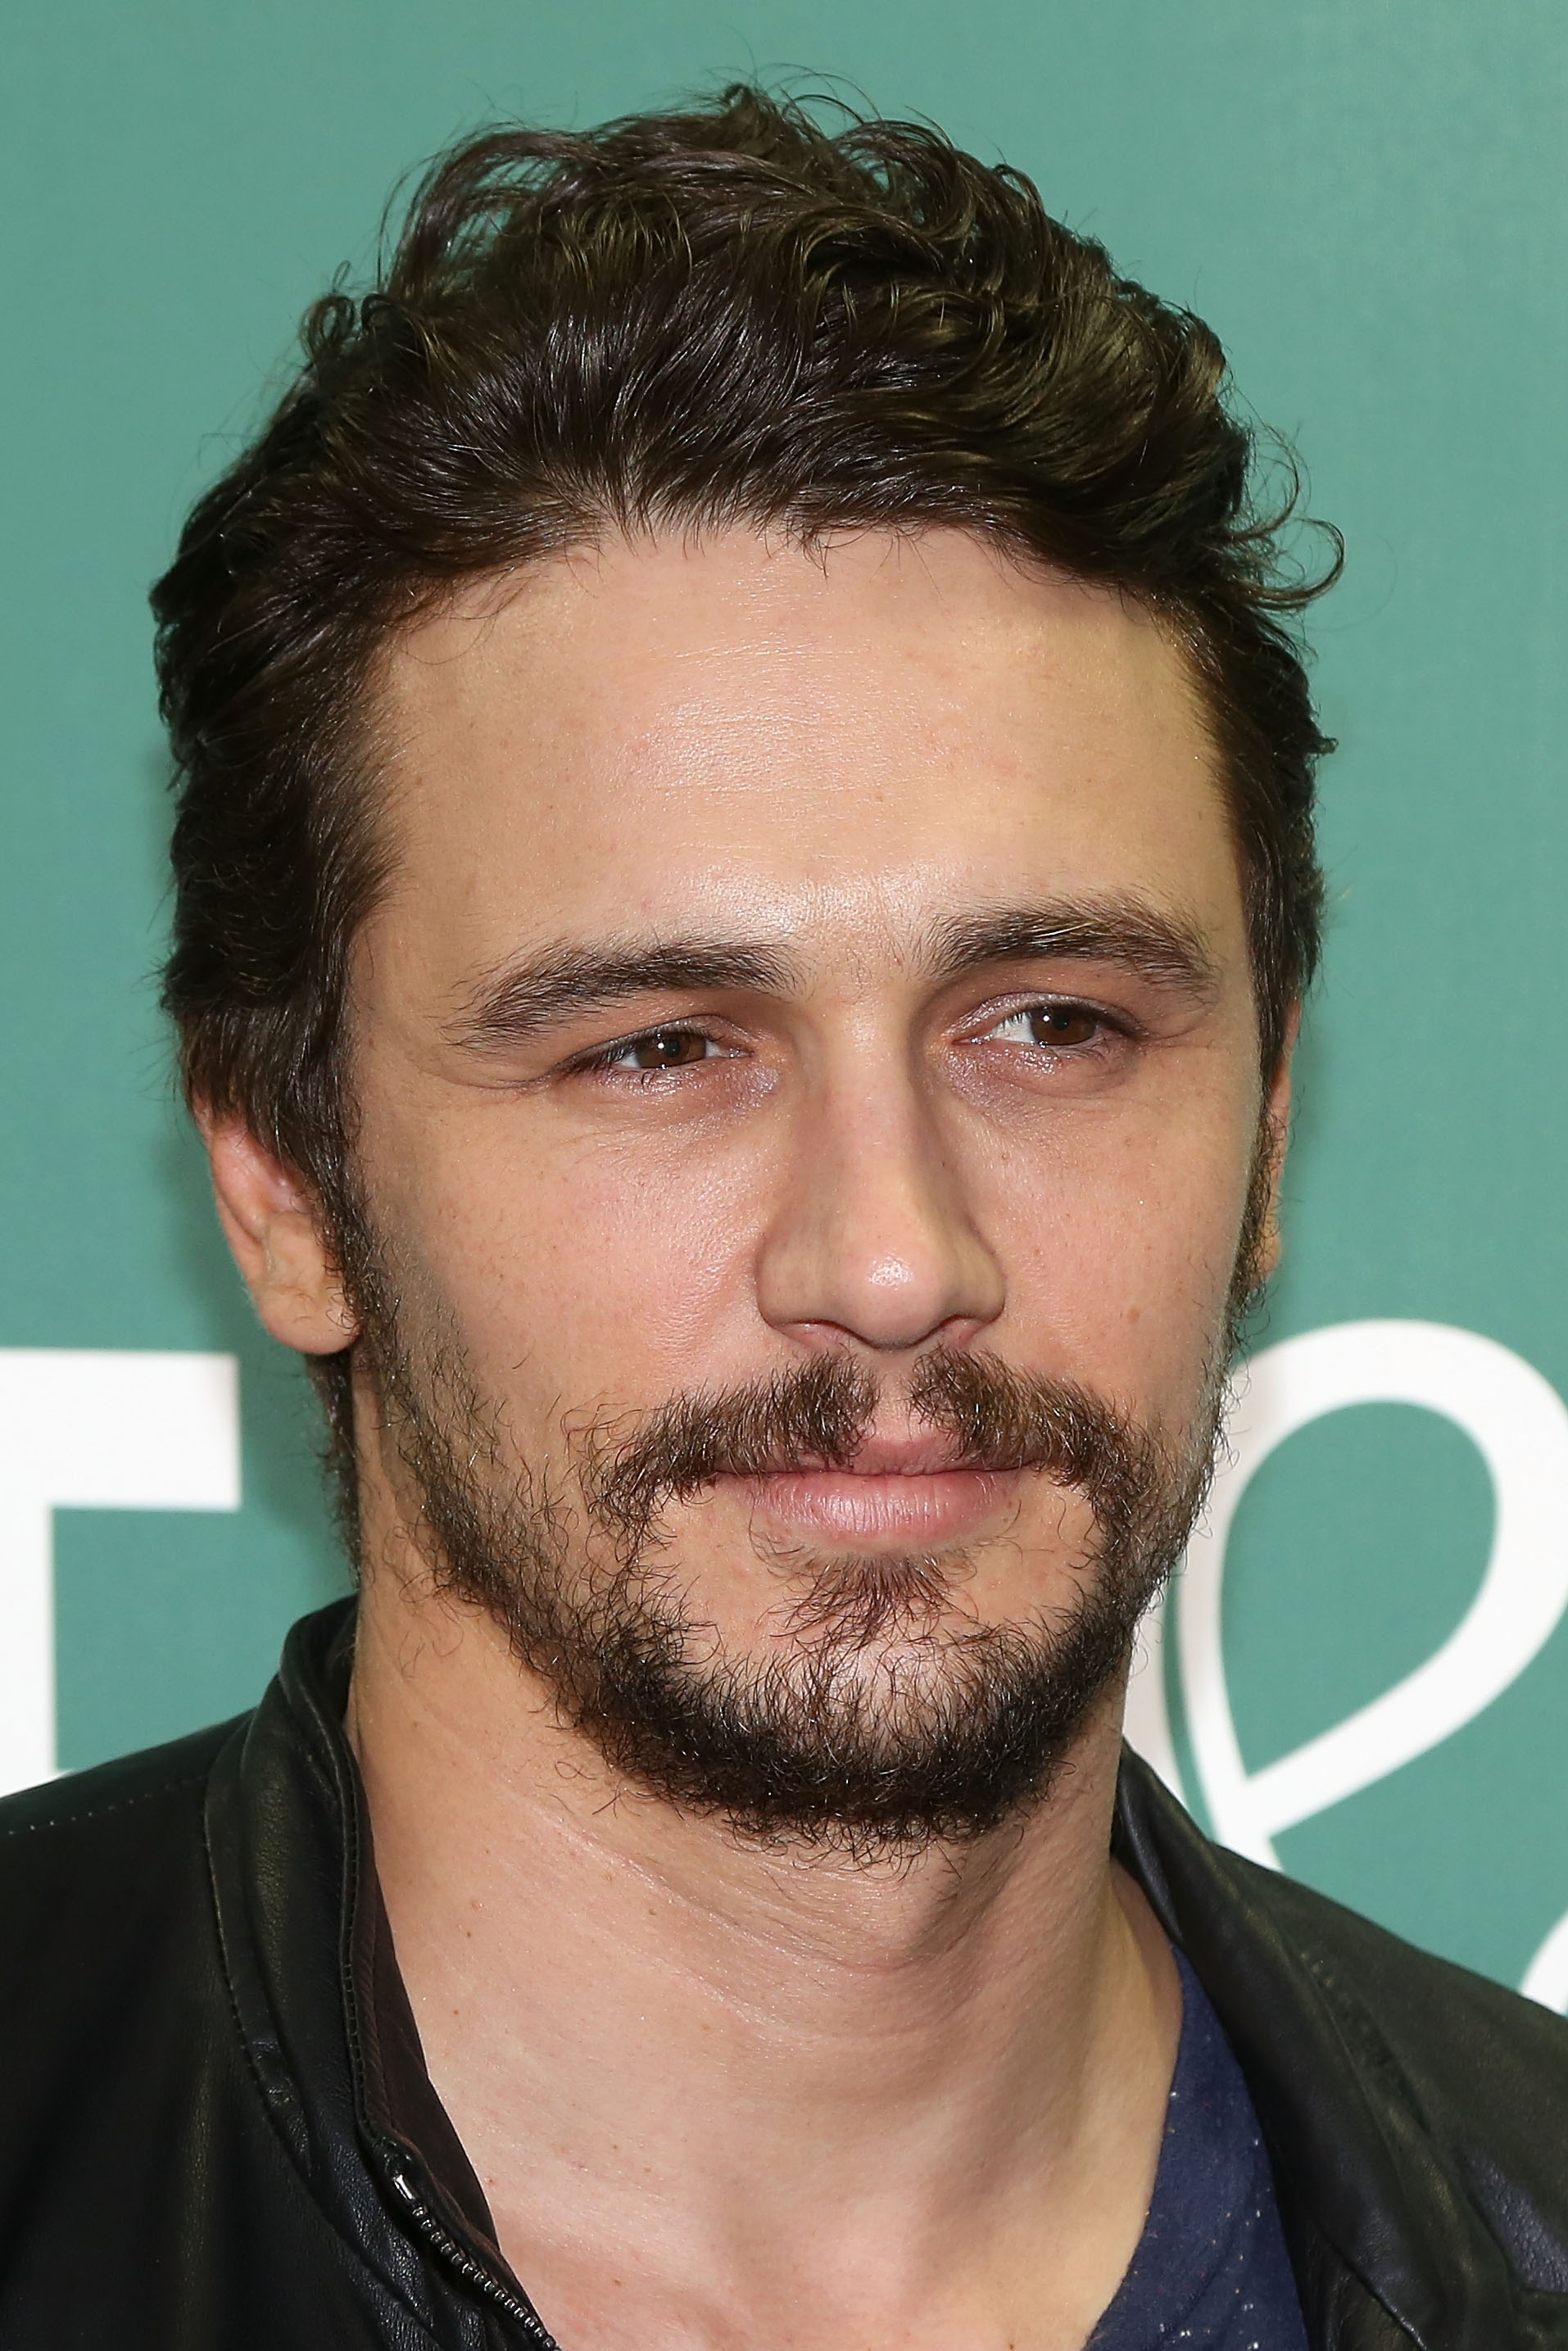 James Franco Wrote a Story About Lindsay Lohan -- Vulture